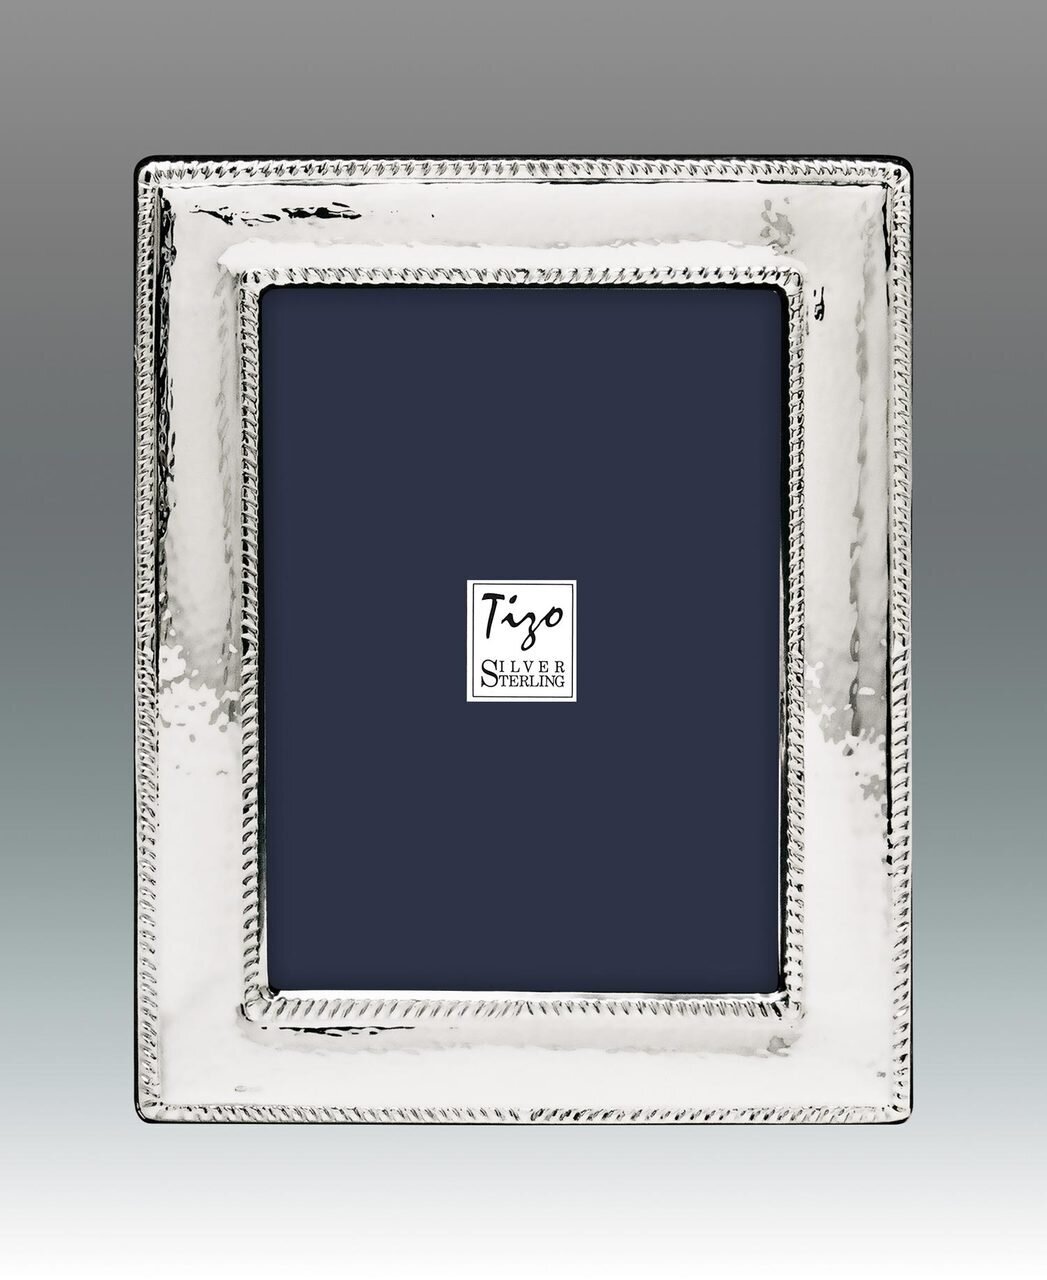 Tizo Shine Beaded 4 x 6 Inch Sterling Silver Picture Frame